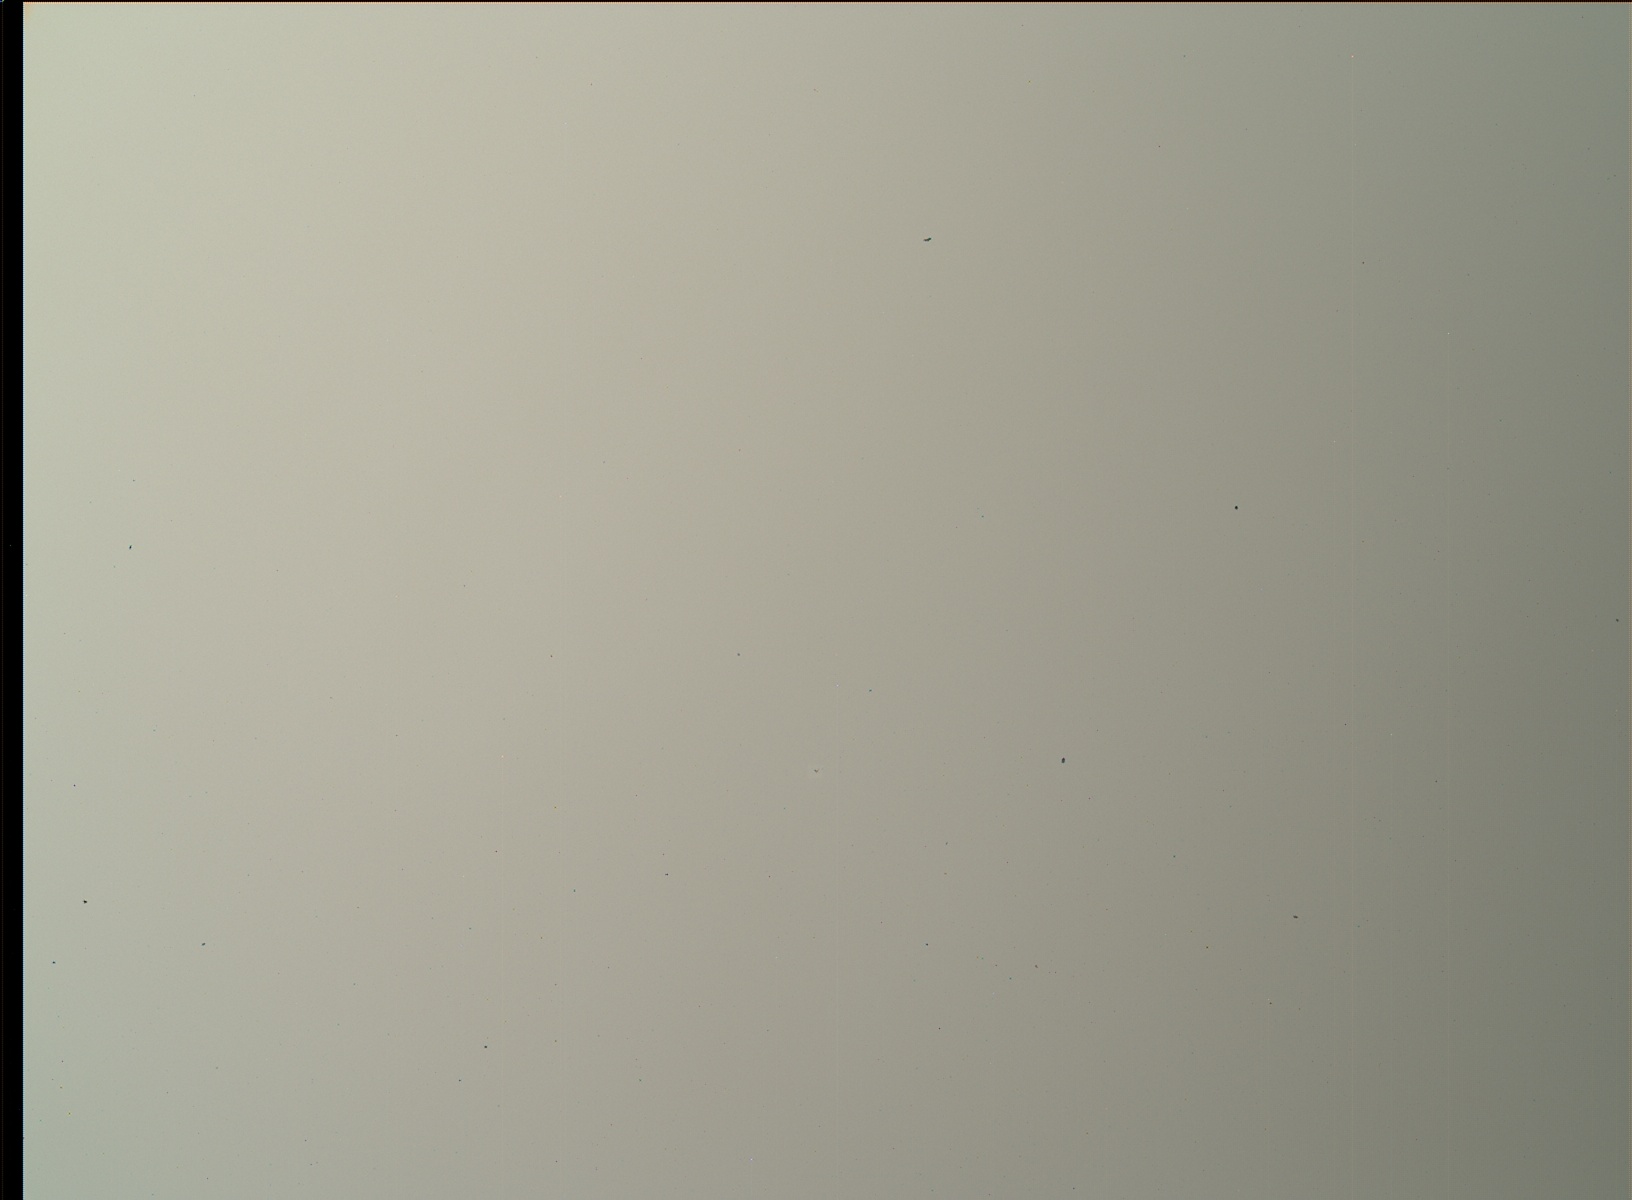 Nasa's Mars rover Curiosity acquired this image using its Mars Hand Lens Imager (MAHLI) on Sol 1340